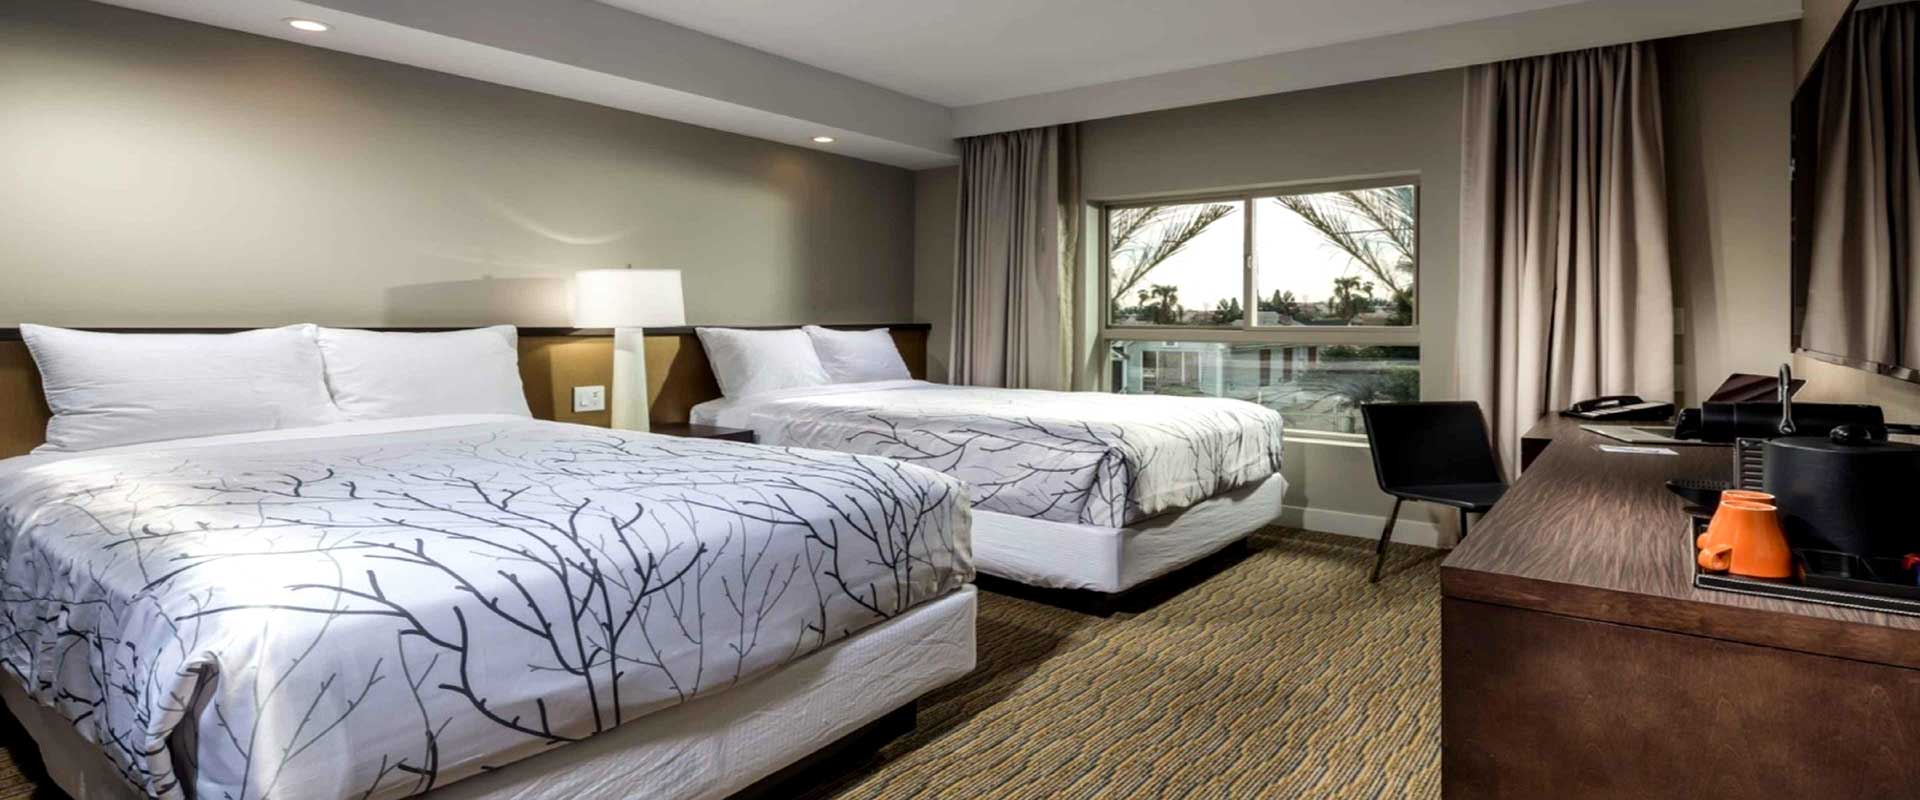 Aventura Hotel Koreatown Downtown | Los Angeles Reasonable Rates Newly Remodeled